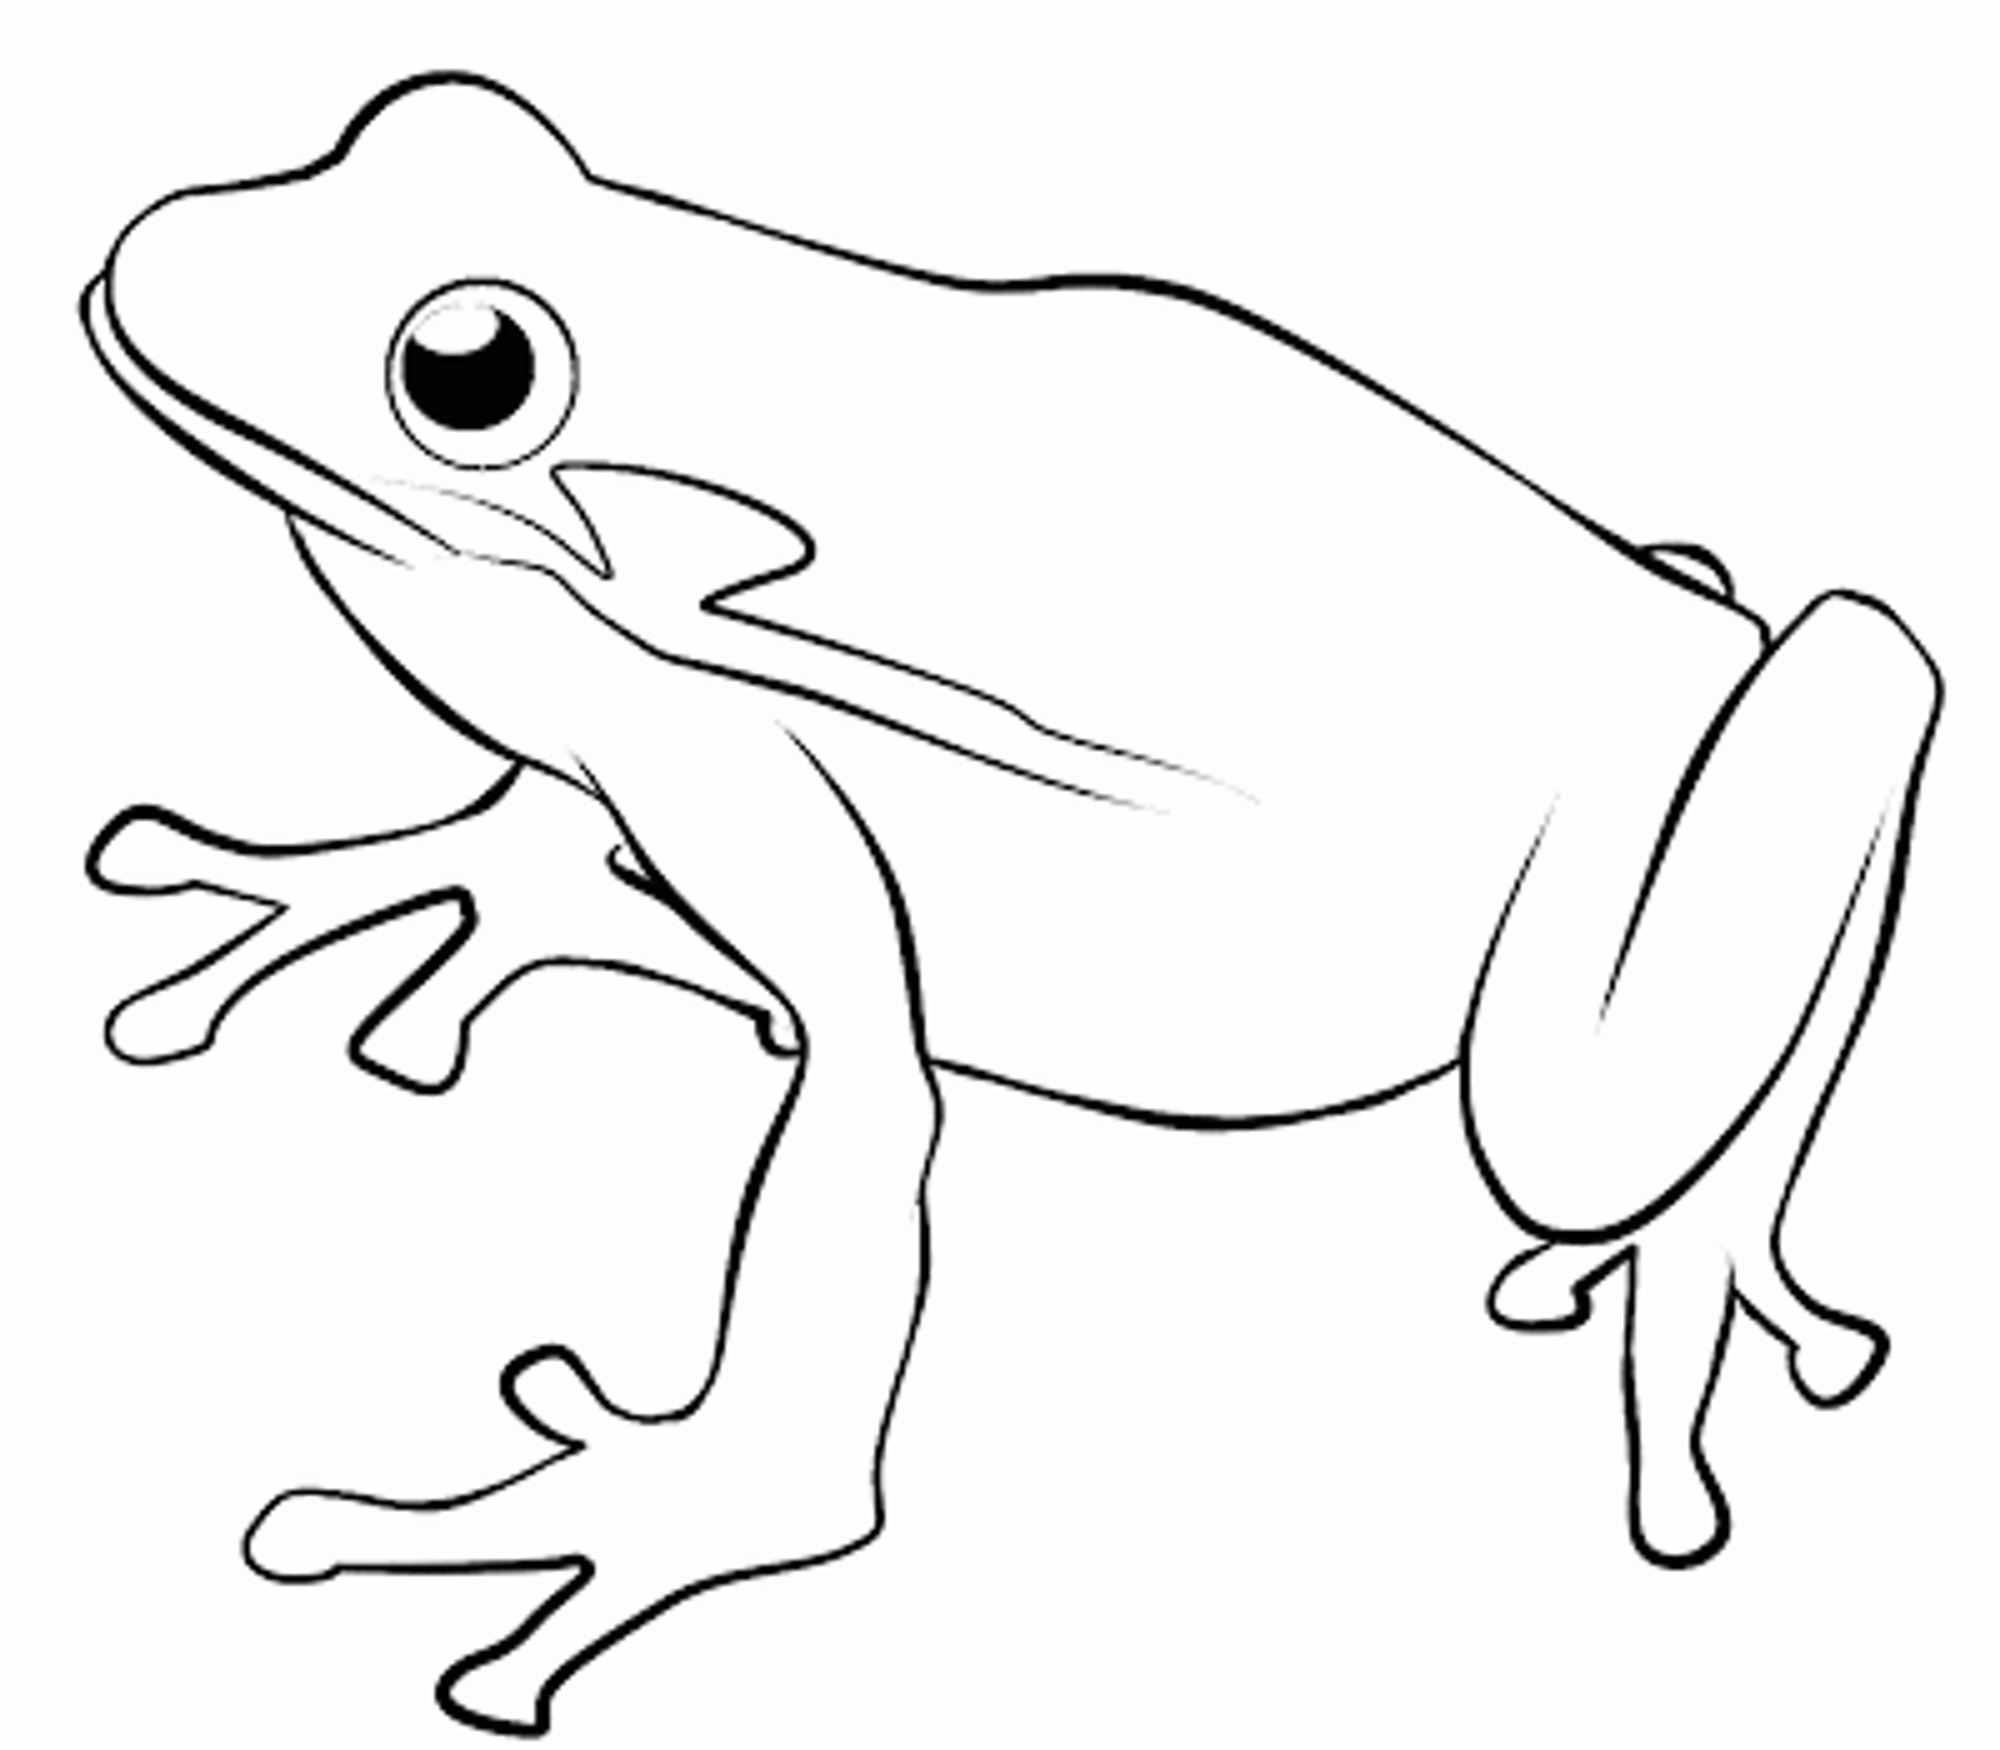 Frog Coloring Page - Coloring Pages for Kids and for Adults